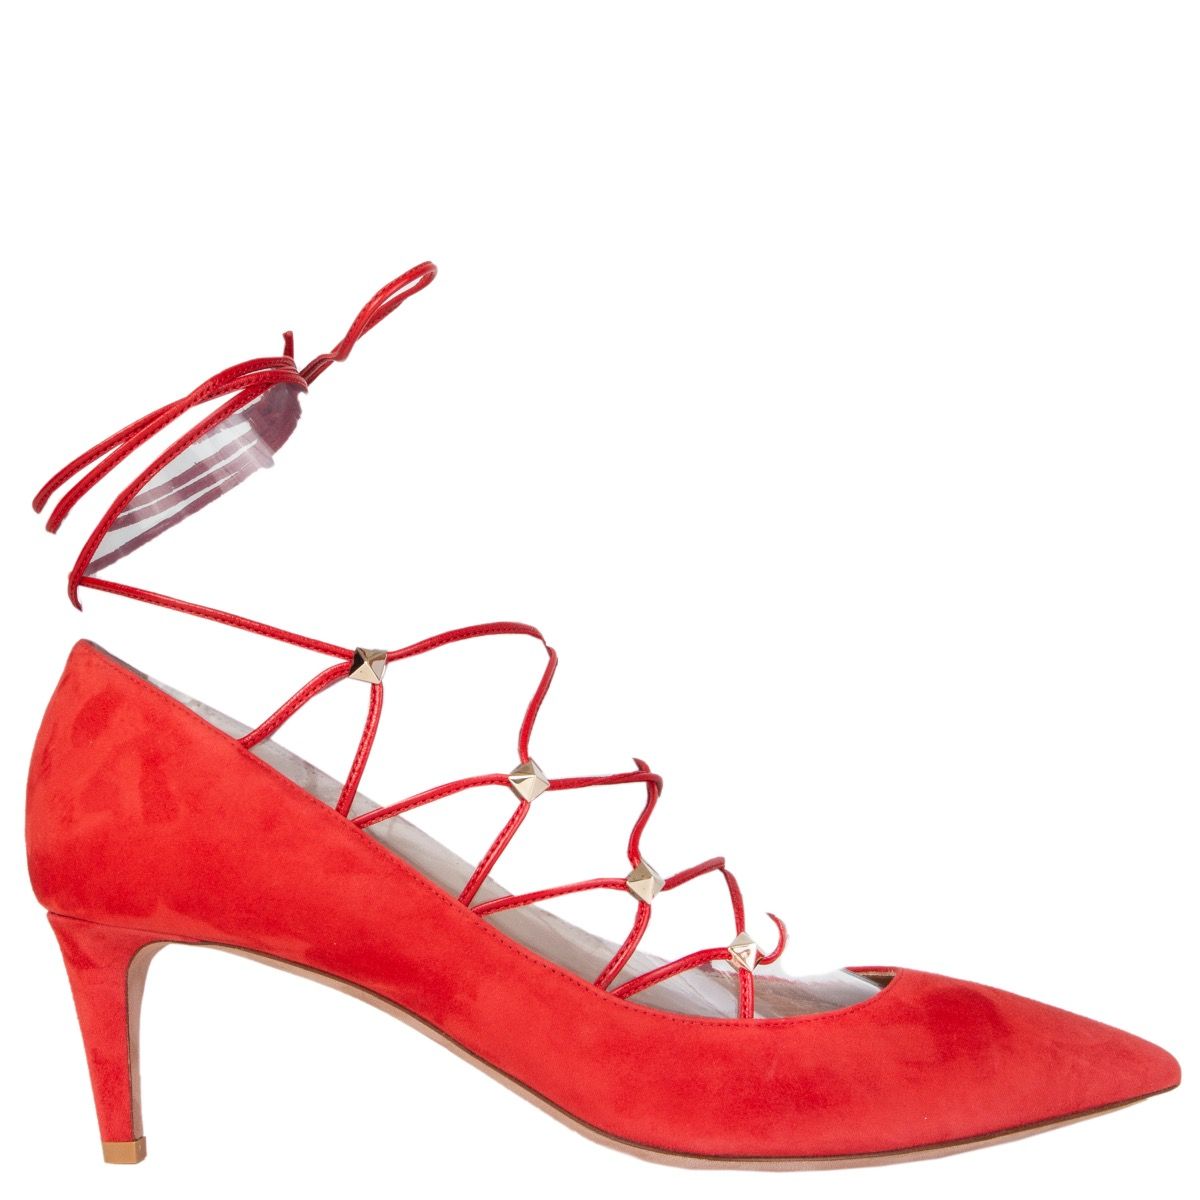 Awaken Forbedring passage Valentino Studded Lace-Up Pumps